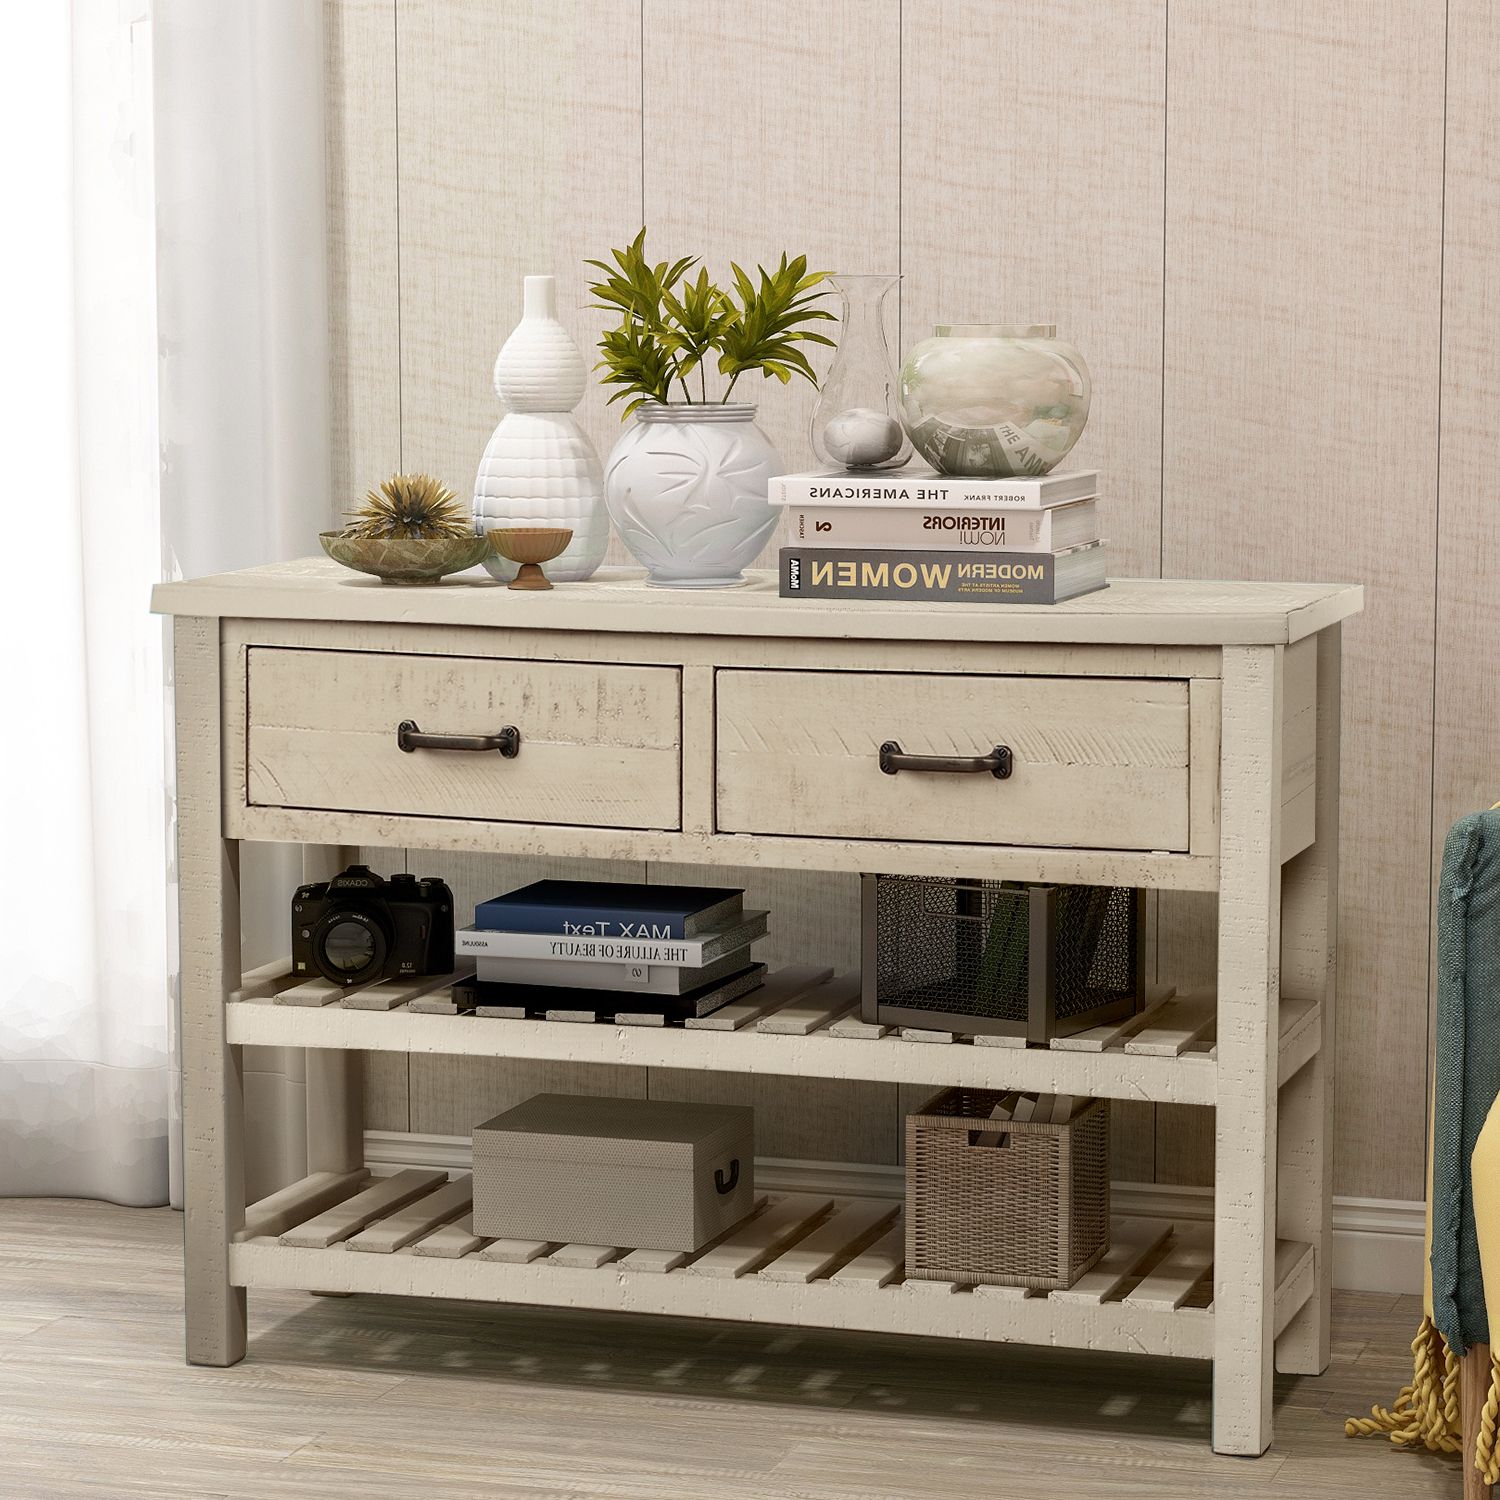 Espresso Wood Storage Console Tables Within Preferred Console Table With 2 Drawers, Retro Sideboard Buffet (View 3 of 10)